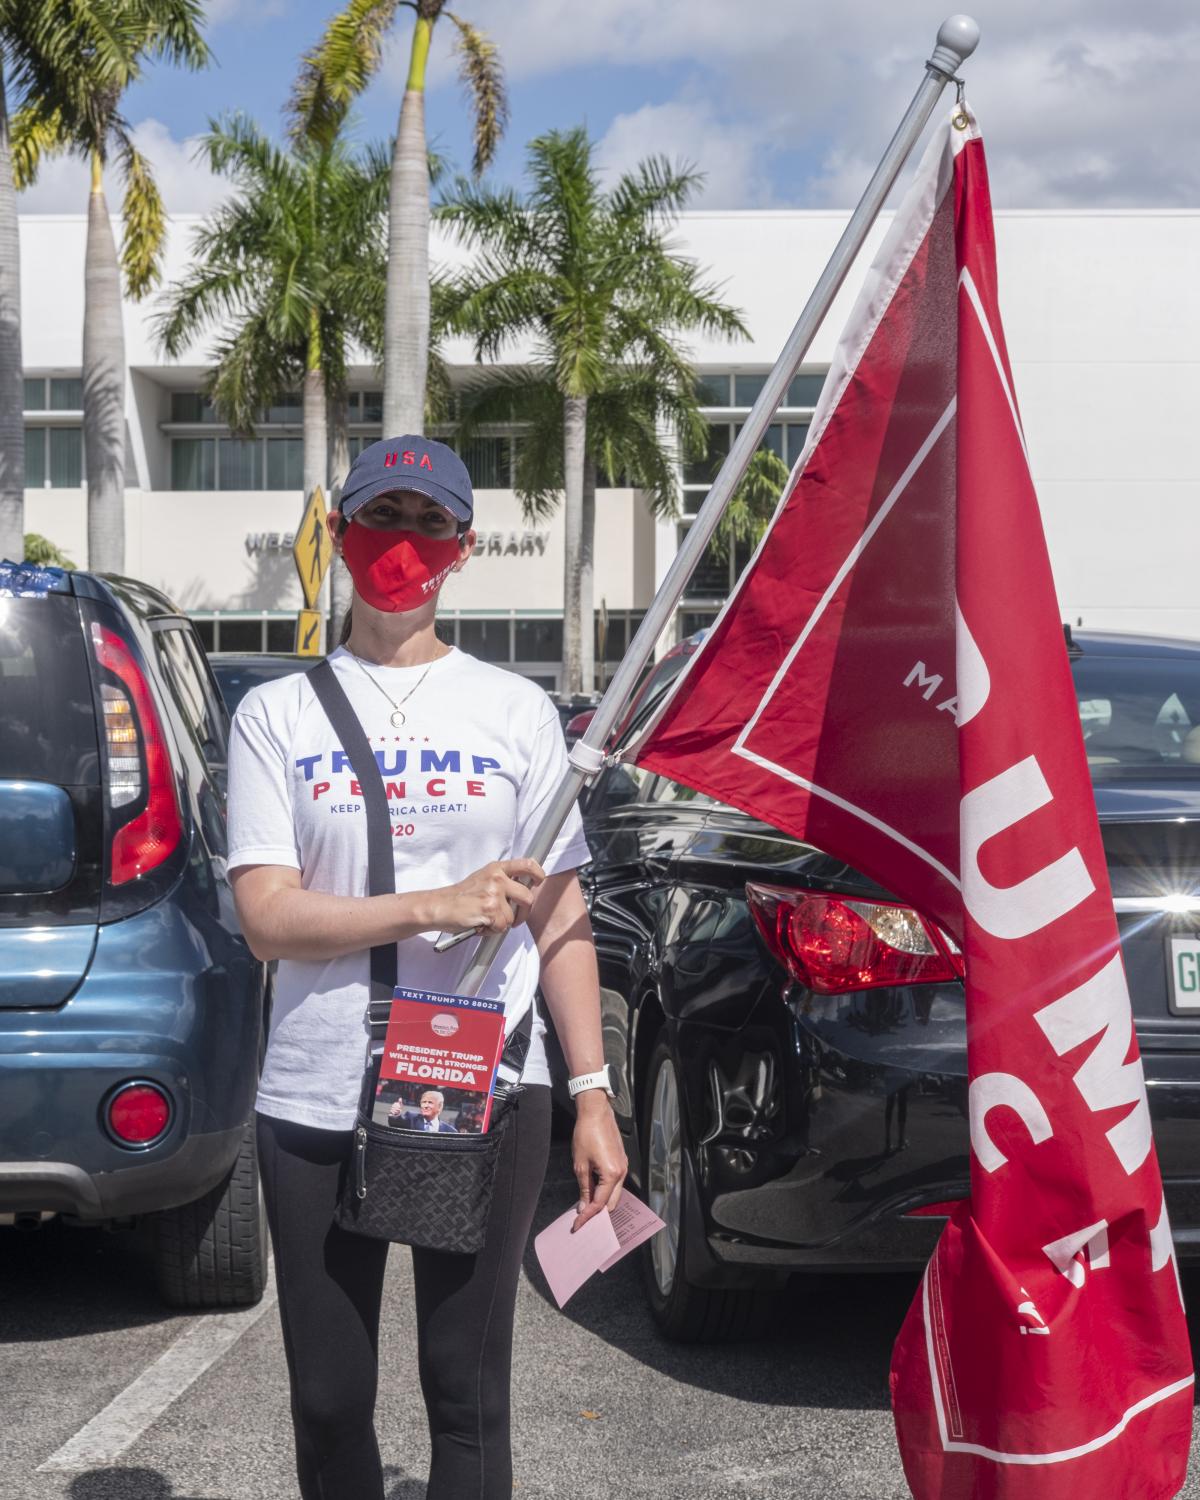 Weston, Fl. 2020 Election: Early Voters -  Weston resident showing support for Donald Trump at the...